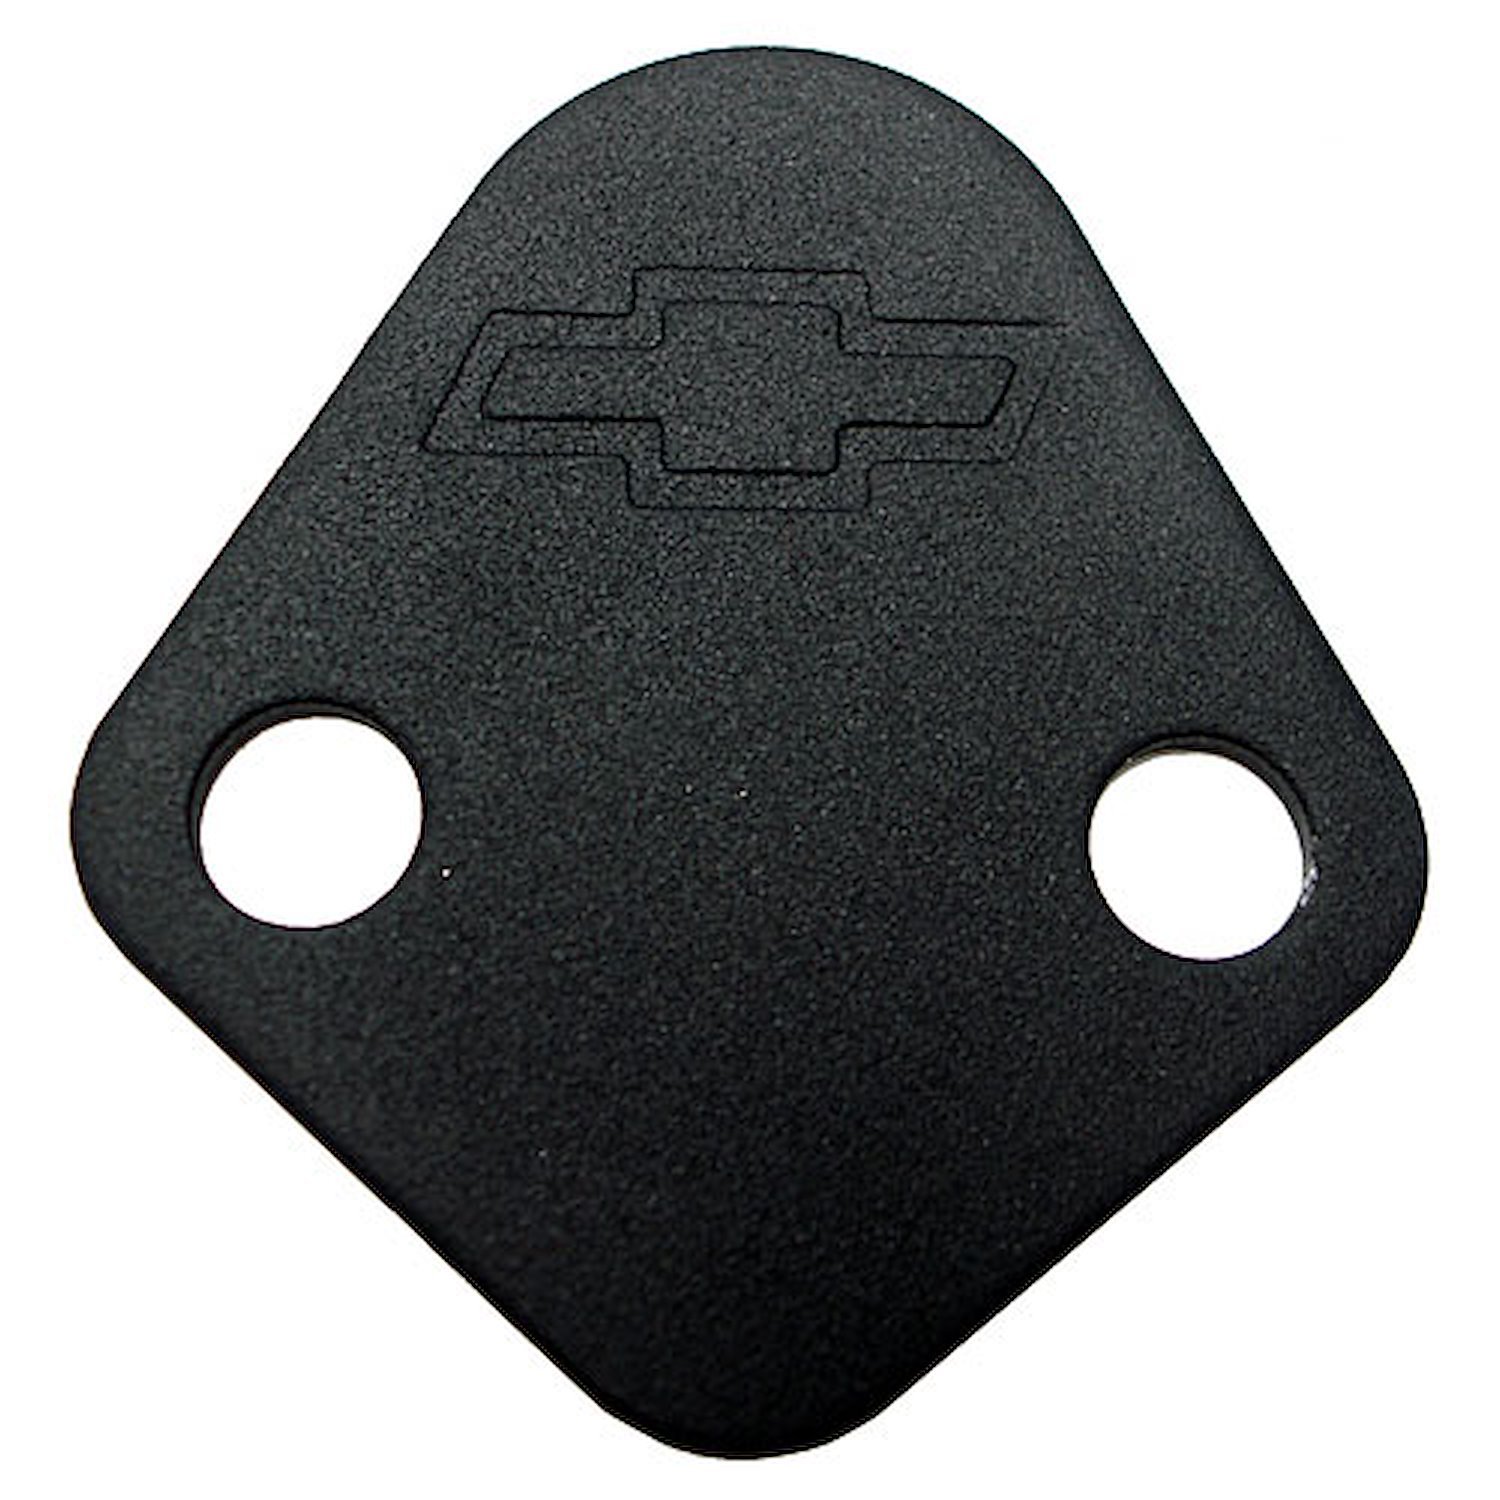 Bowtie Fuel Pump Block-Off Plate for Big Block Chevy in Black Crinkle